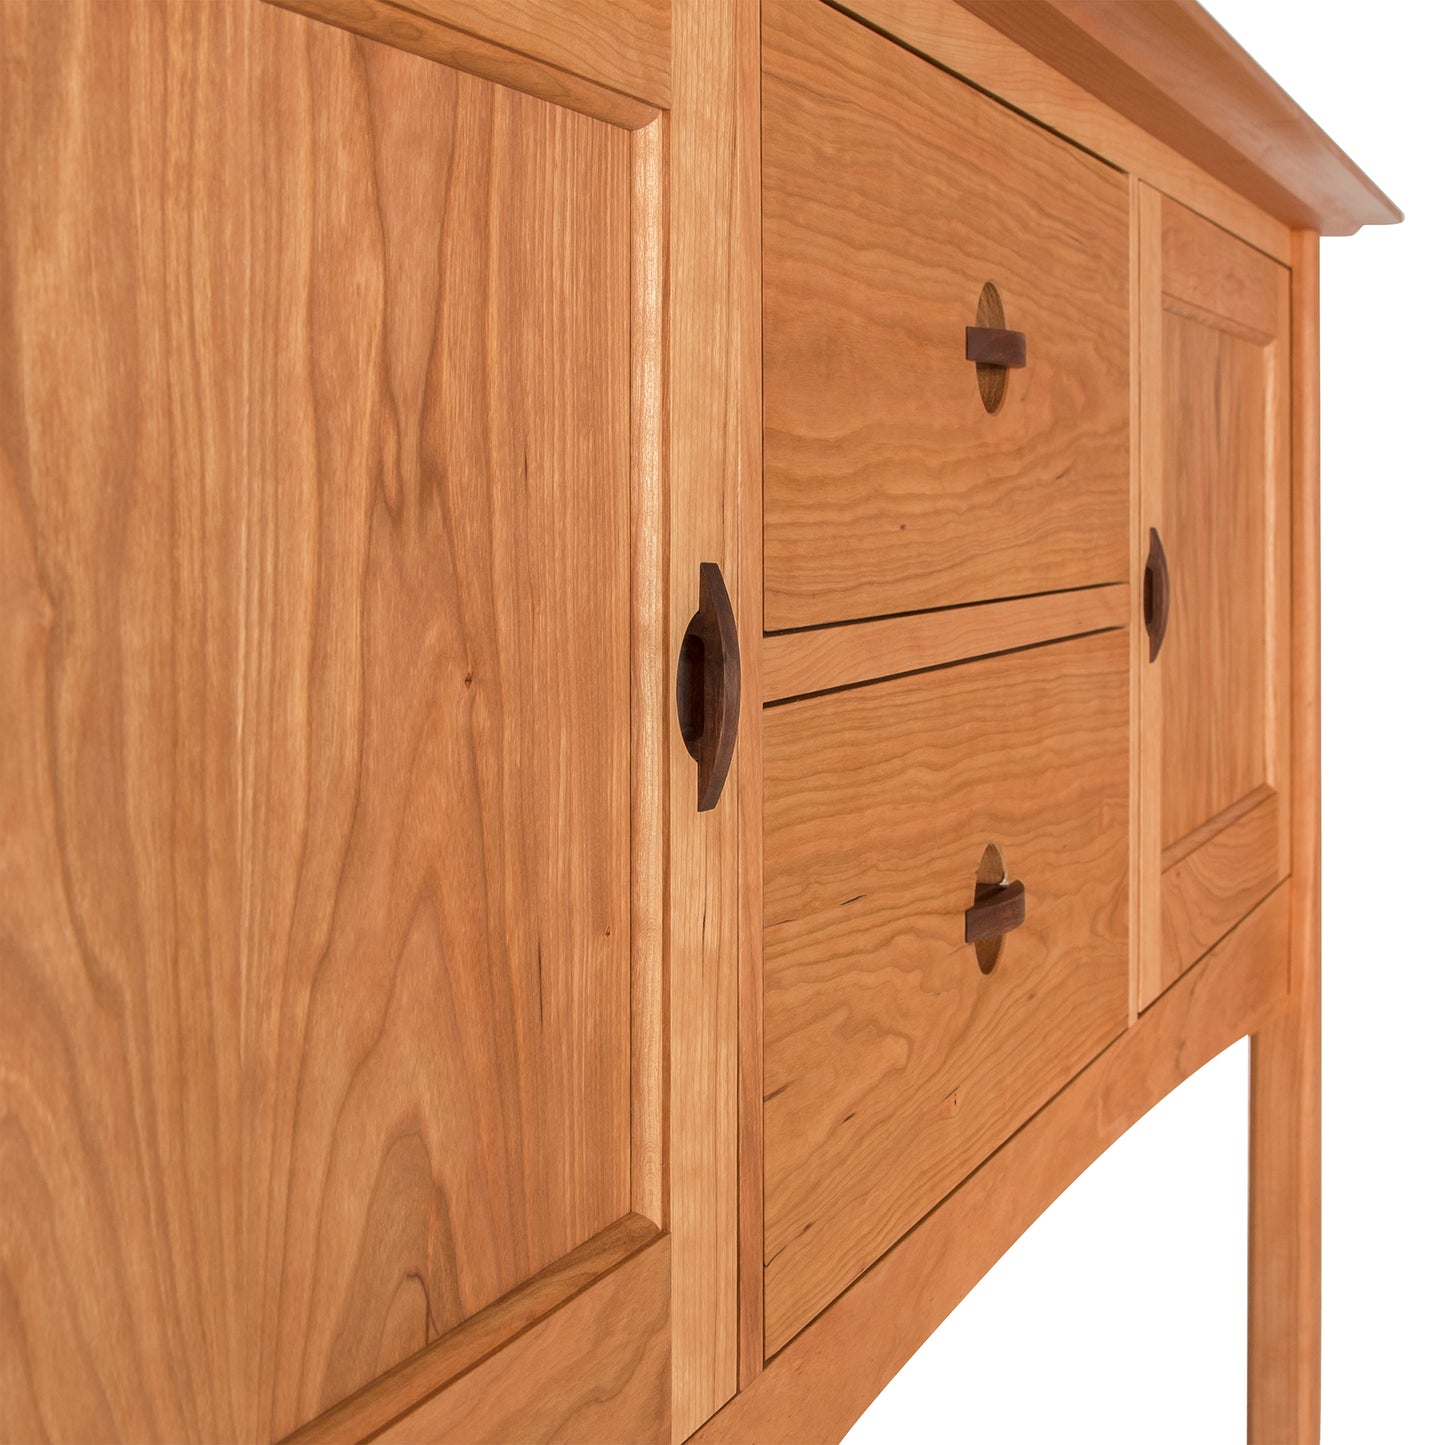 A luxurious Cherry Moon Hunt Board by Maple Corner Woodworks, perfect for any dining room or luxury kitchen, featuring drawers and knobs for added functionality.